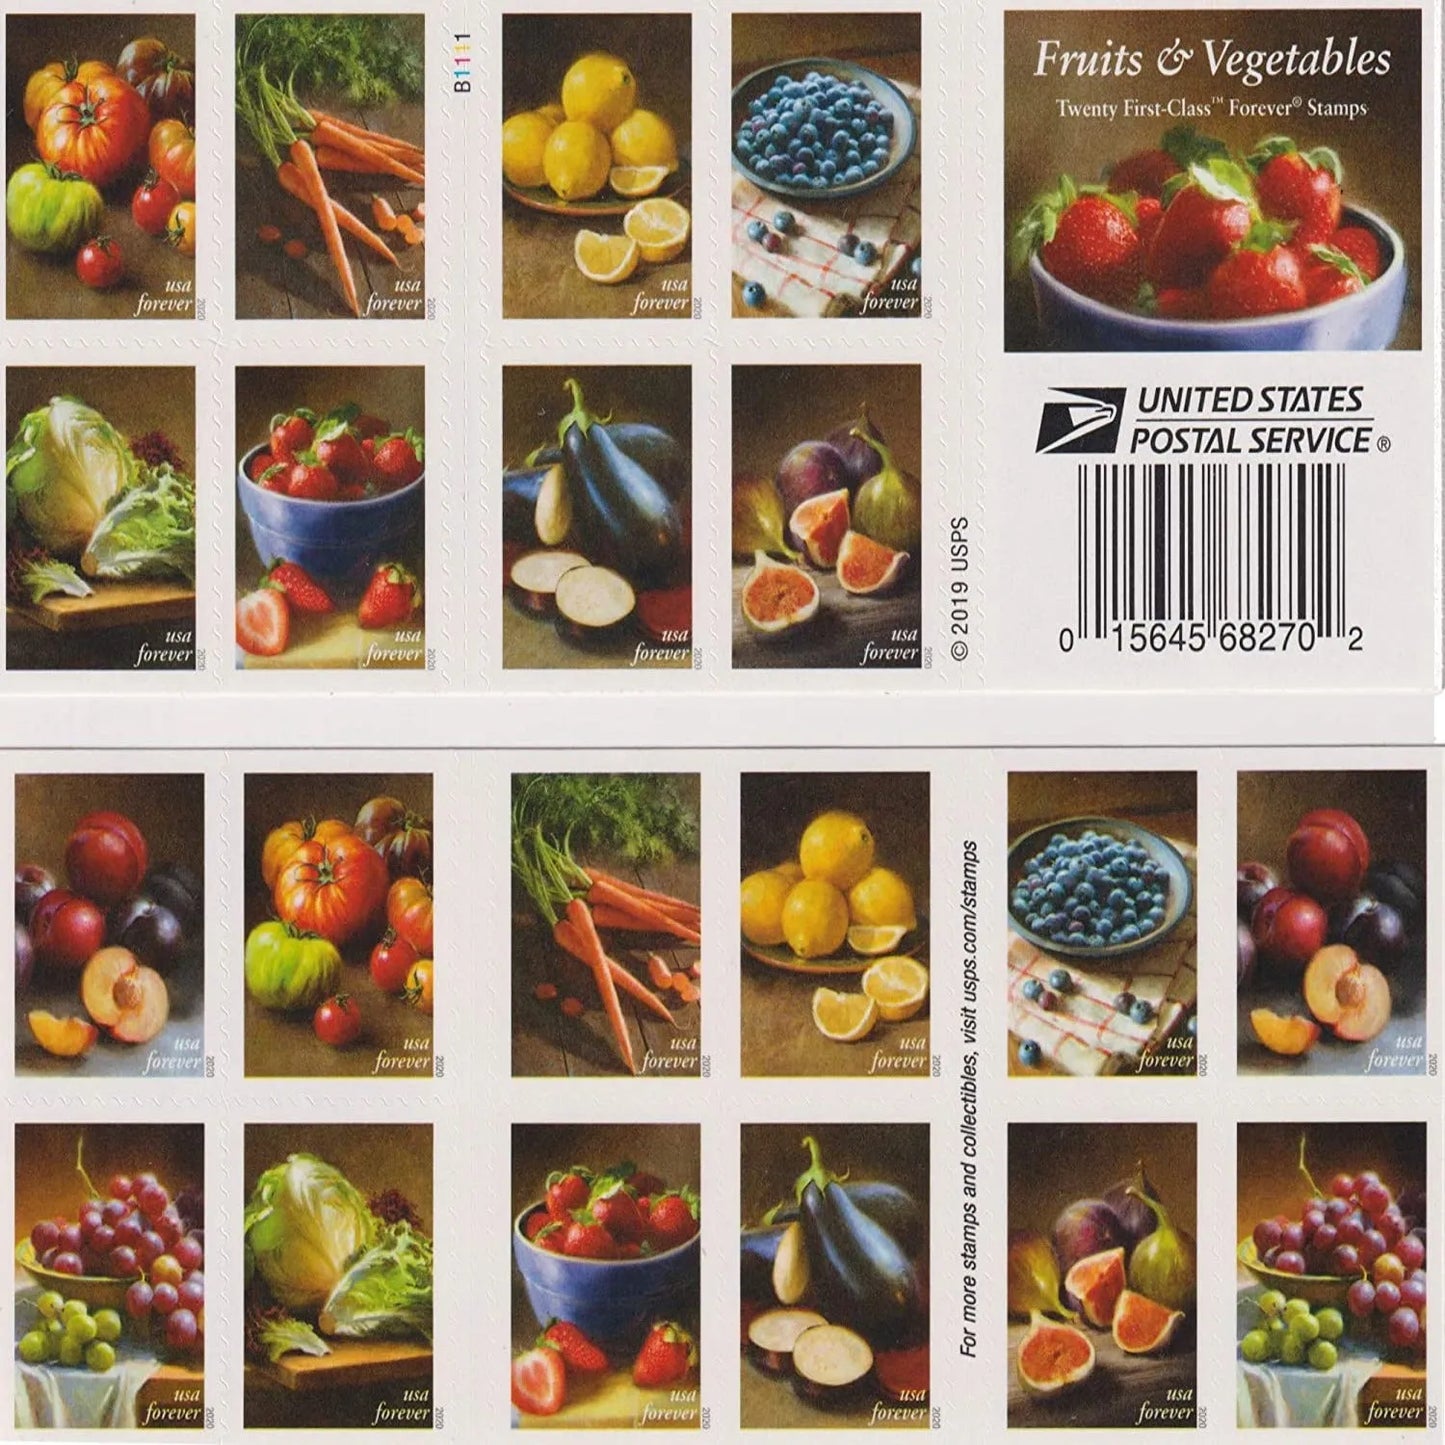 2020 Fruit Of Vegetables Forever First Class Postage Stamps